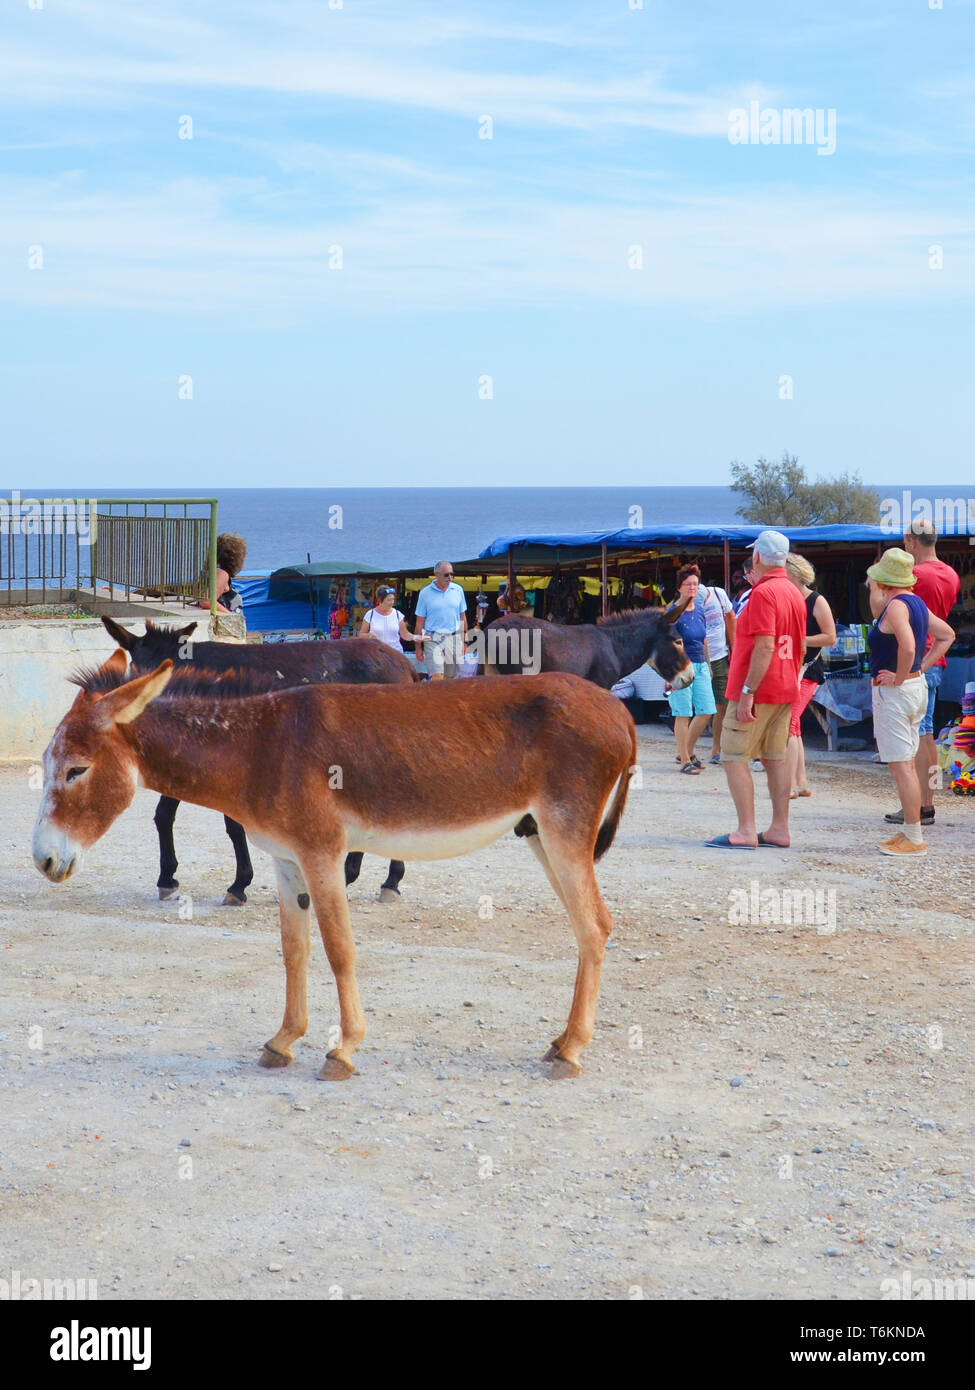 Dipkarpaz, Turkish Northern Cyprus - Oct 3rd 2018: Wild donkeys standing by the traditional outdoor market. Several tourists are passing by. The animals are local tourist attraction. Stock Photo